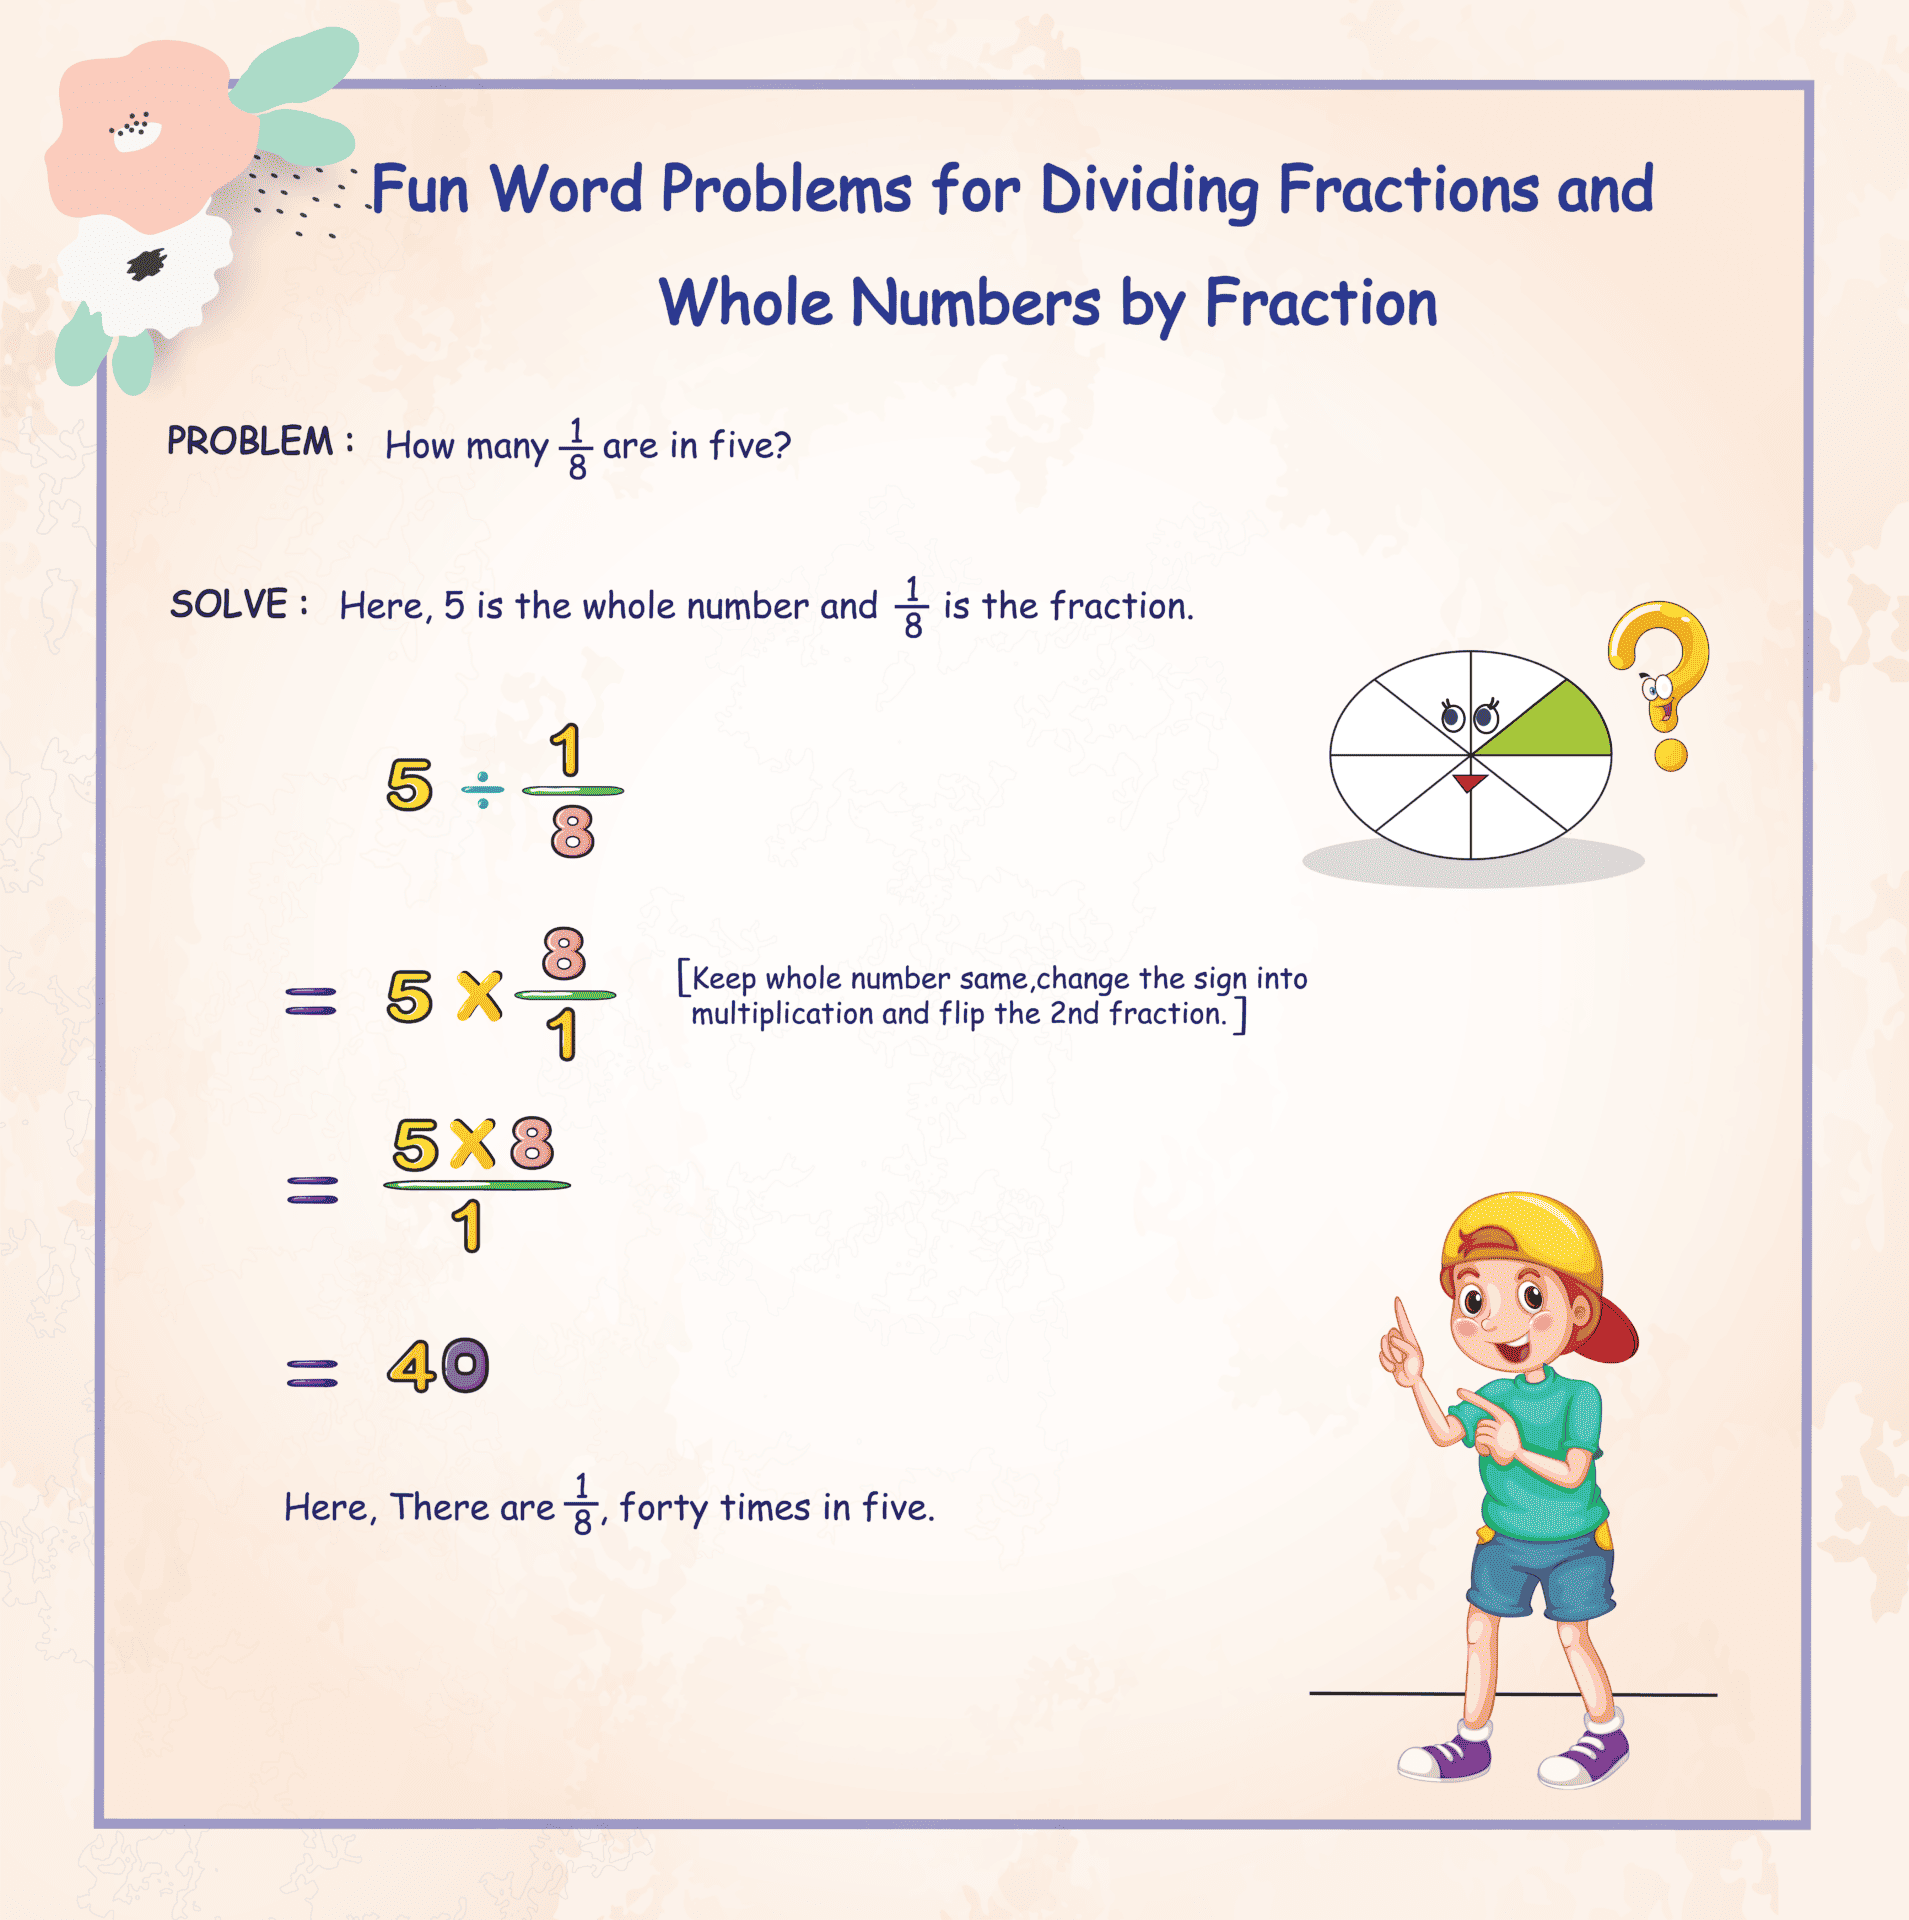 Fun word problems for dividing fractions and whole numbers by fraction